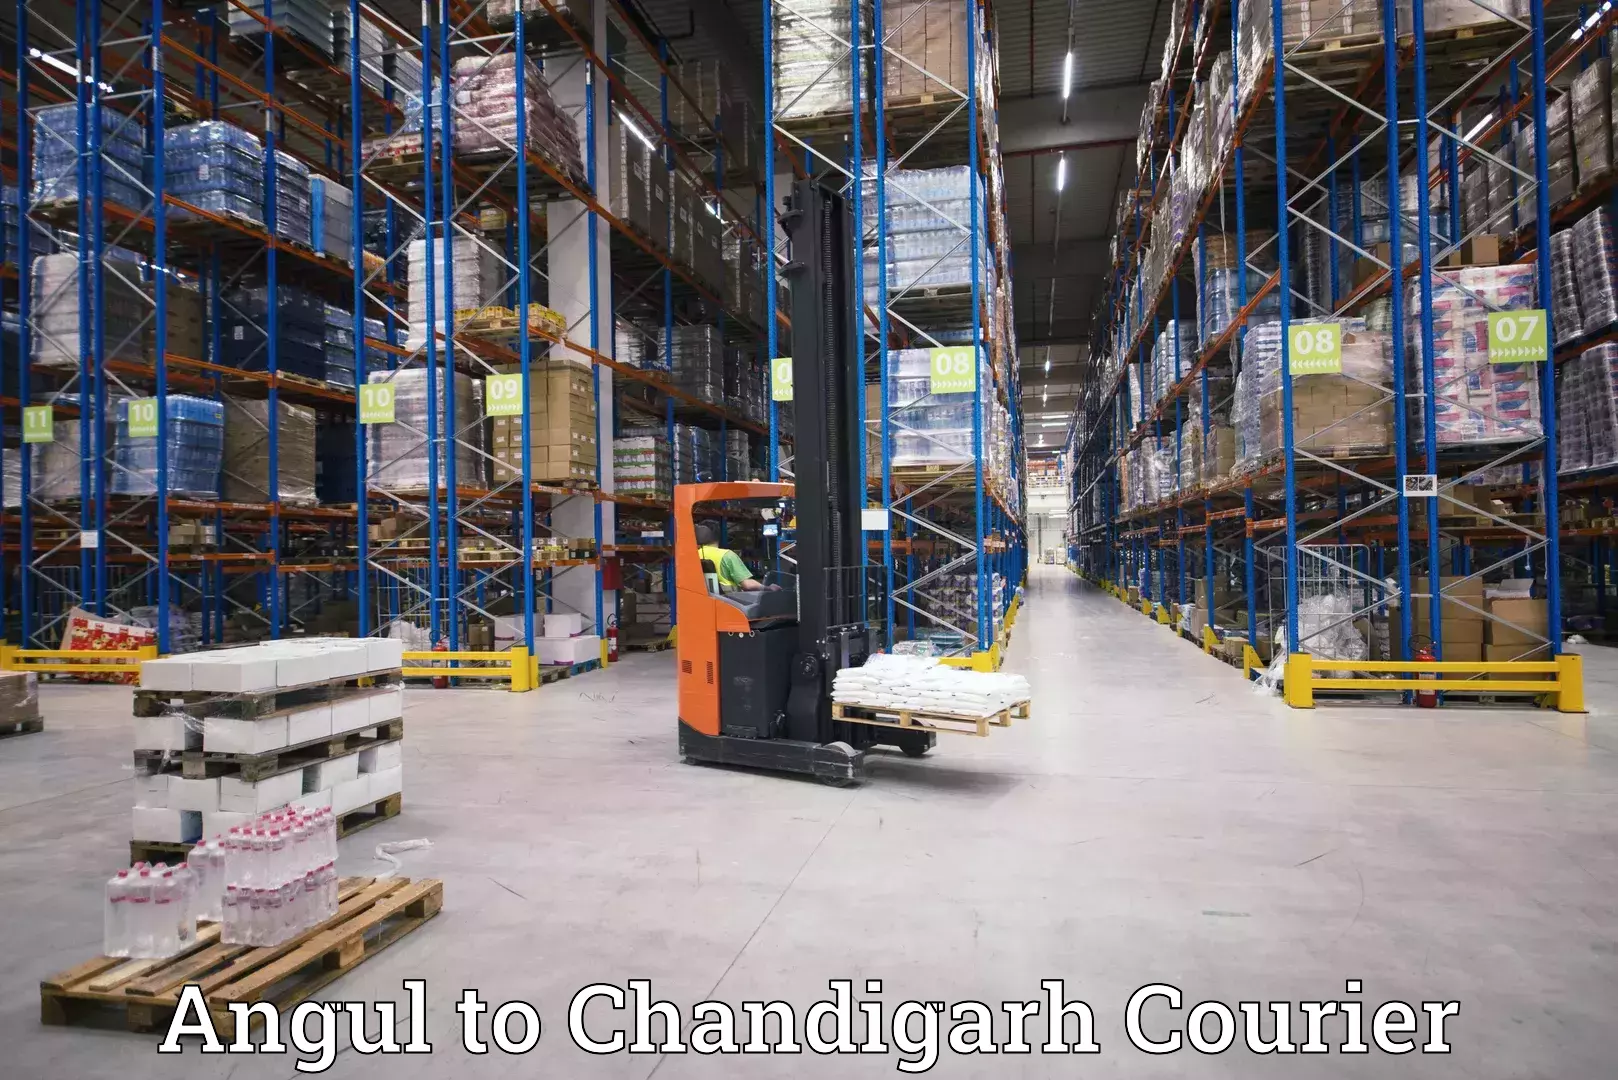 International courier networks Angul to Chandigarh